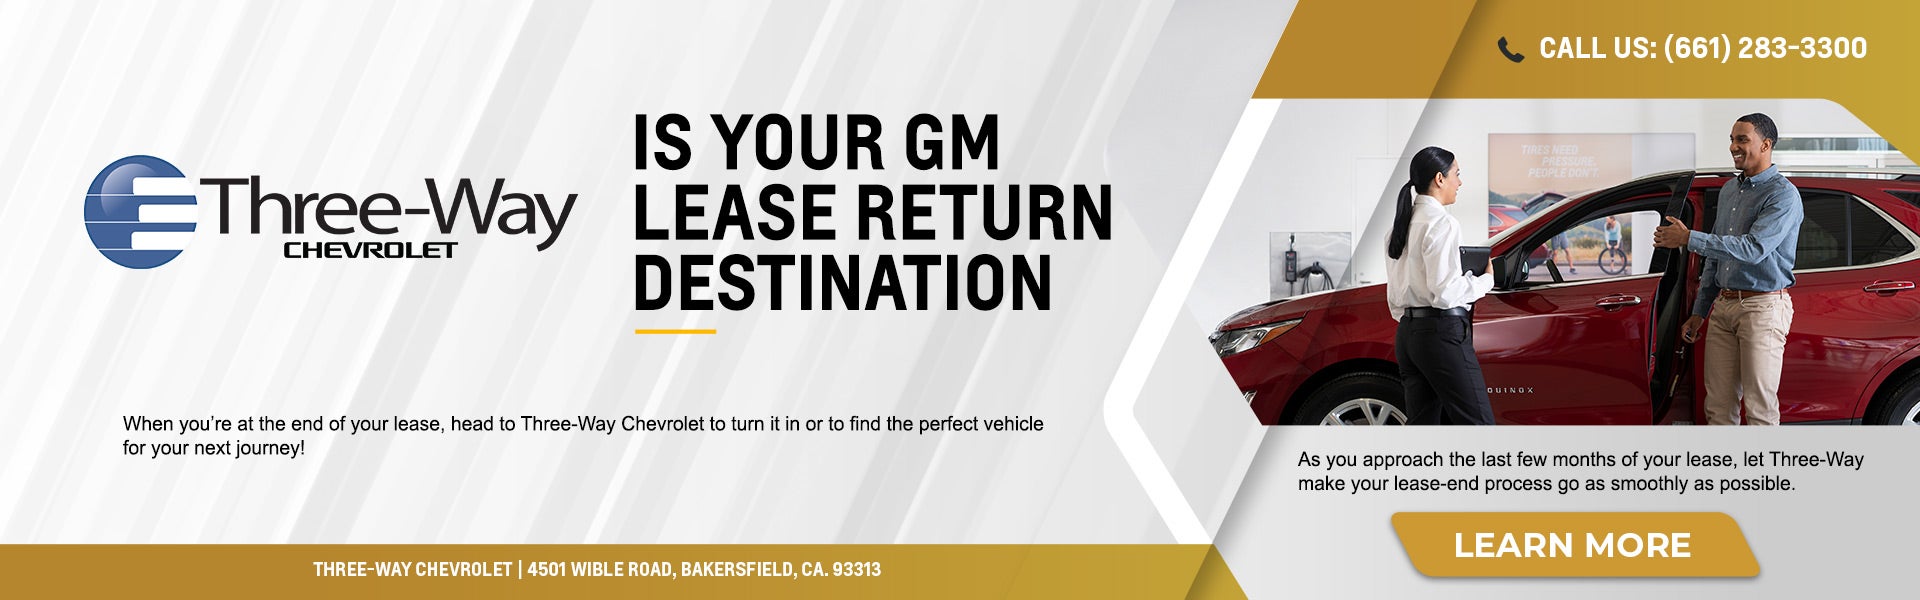 Three-Way Chevrolet is your lease return destination